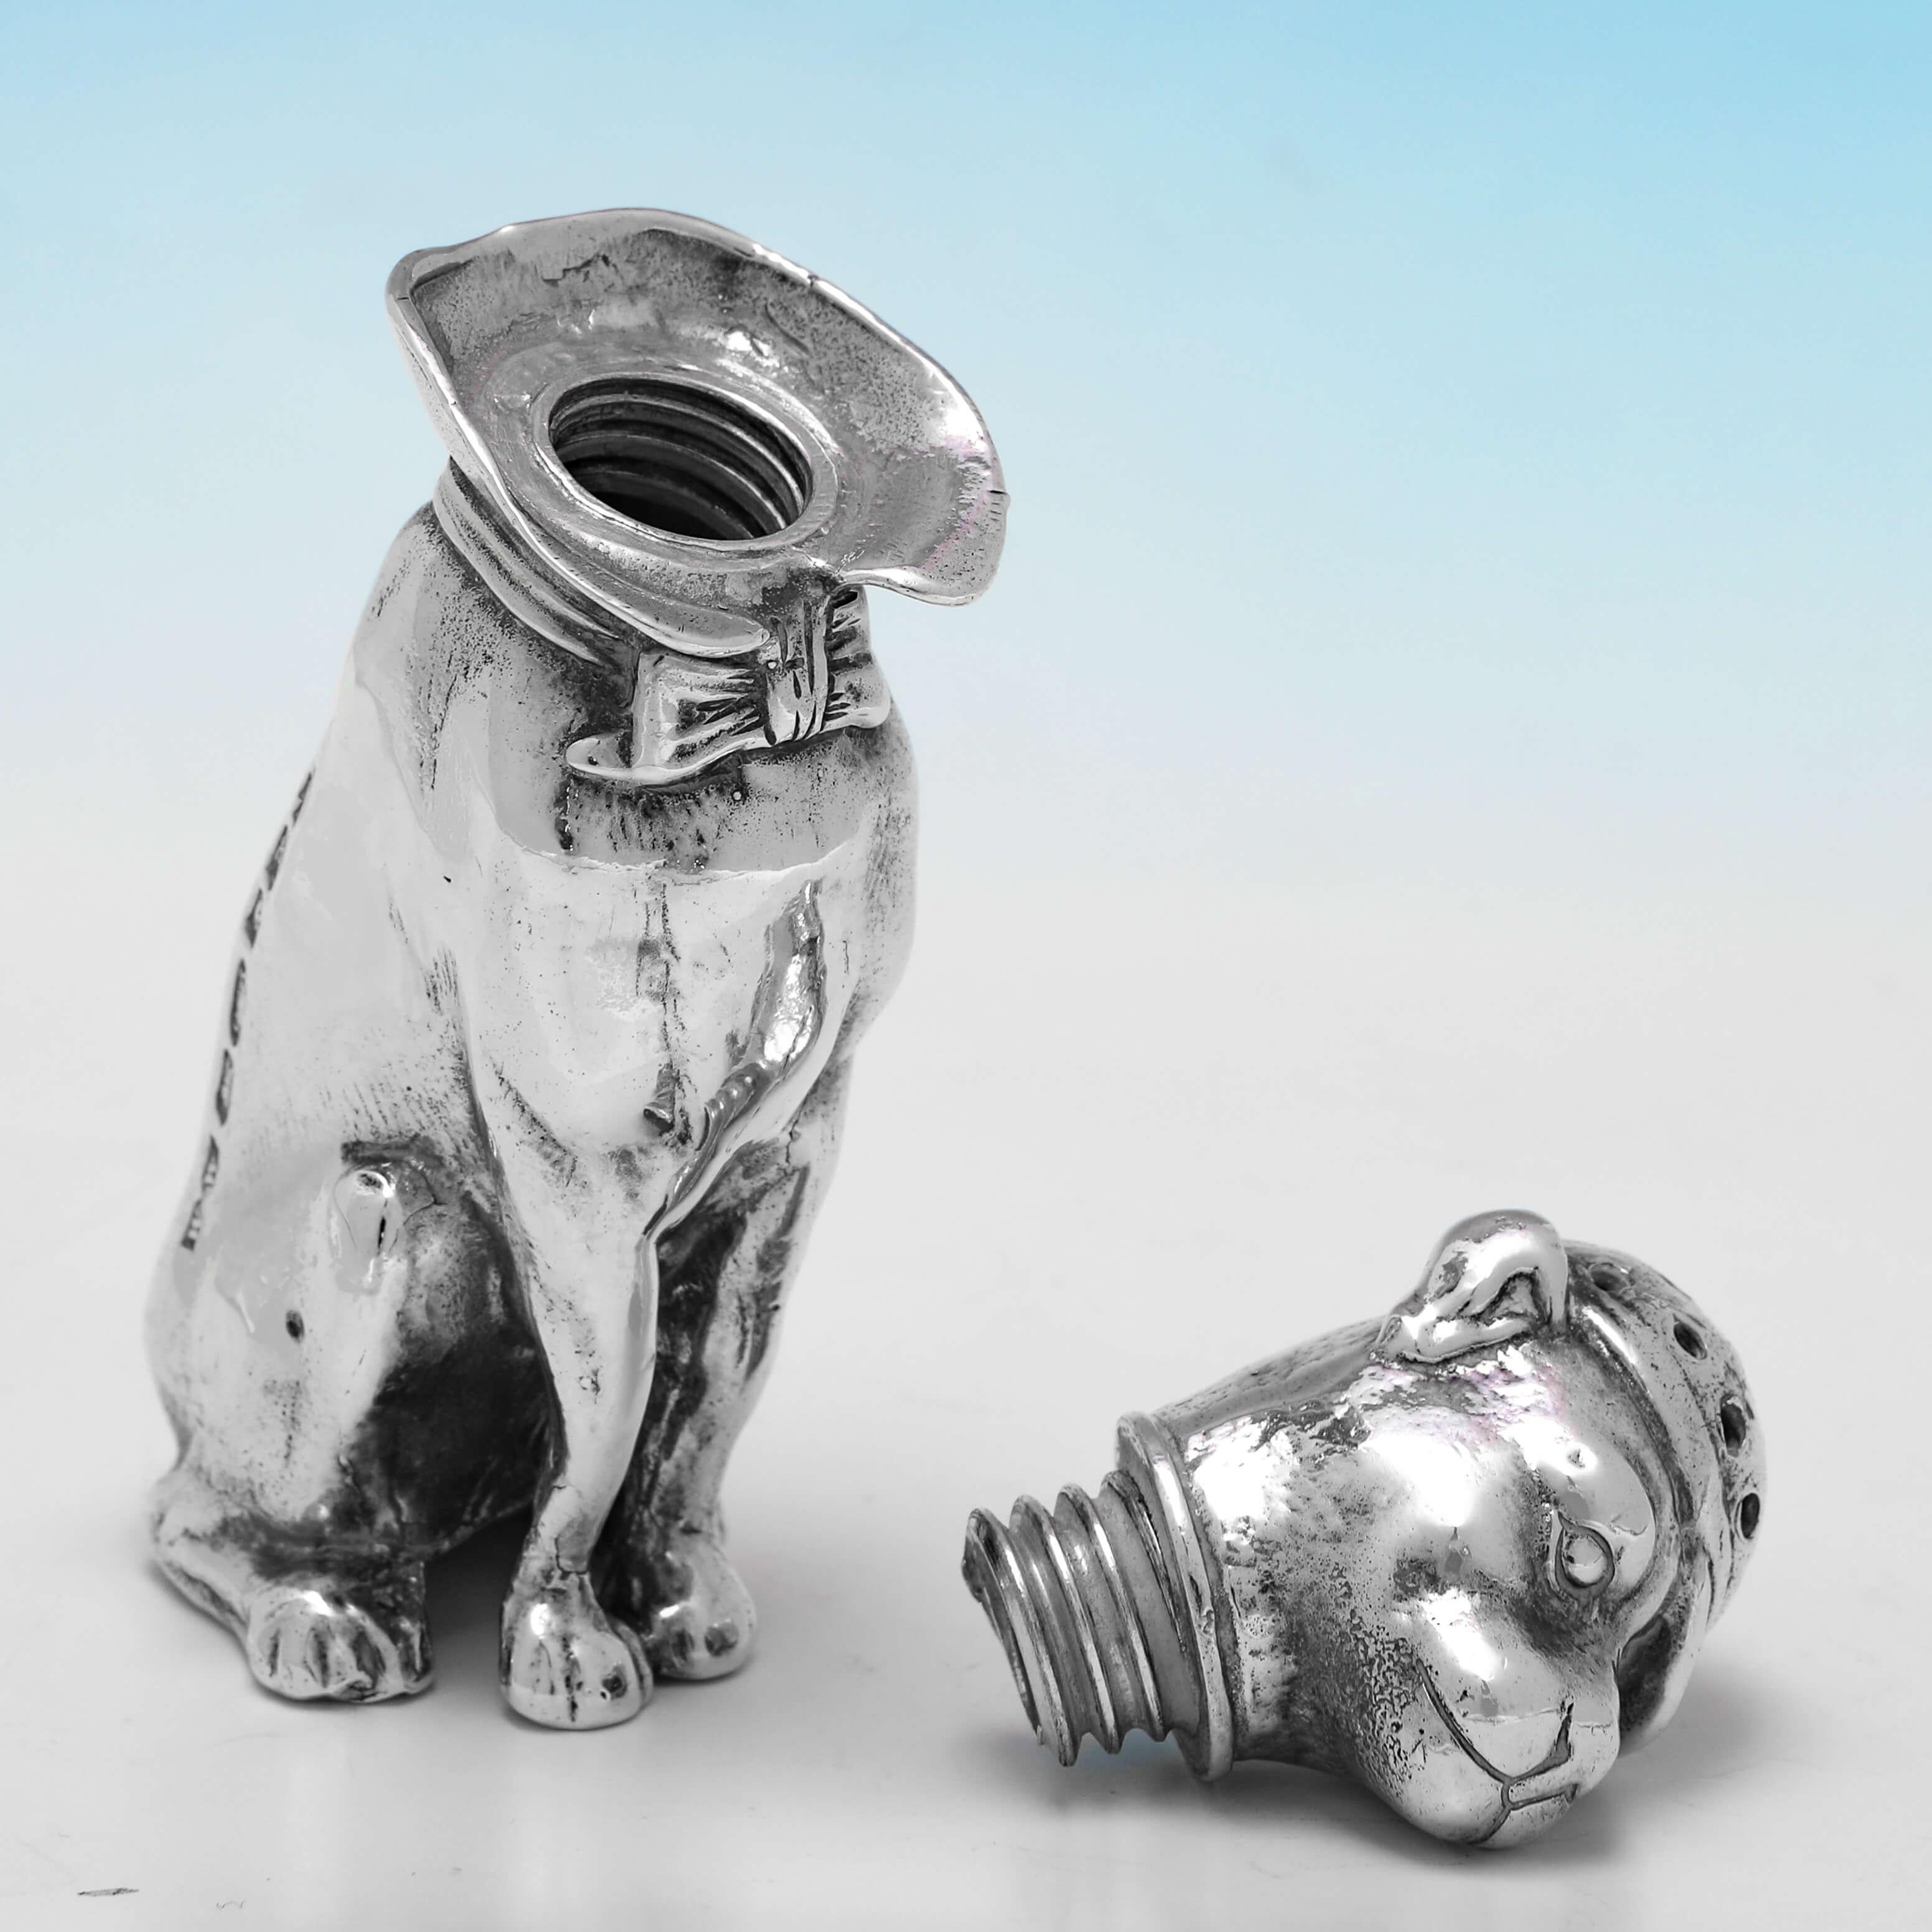 Contemporary Novelty Sterling Silver 'Dog' Pepper Pot, London, 2000 For Sale